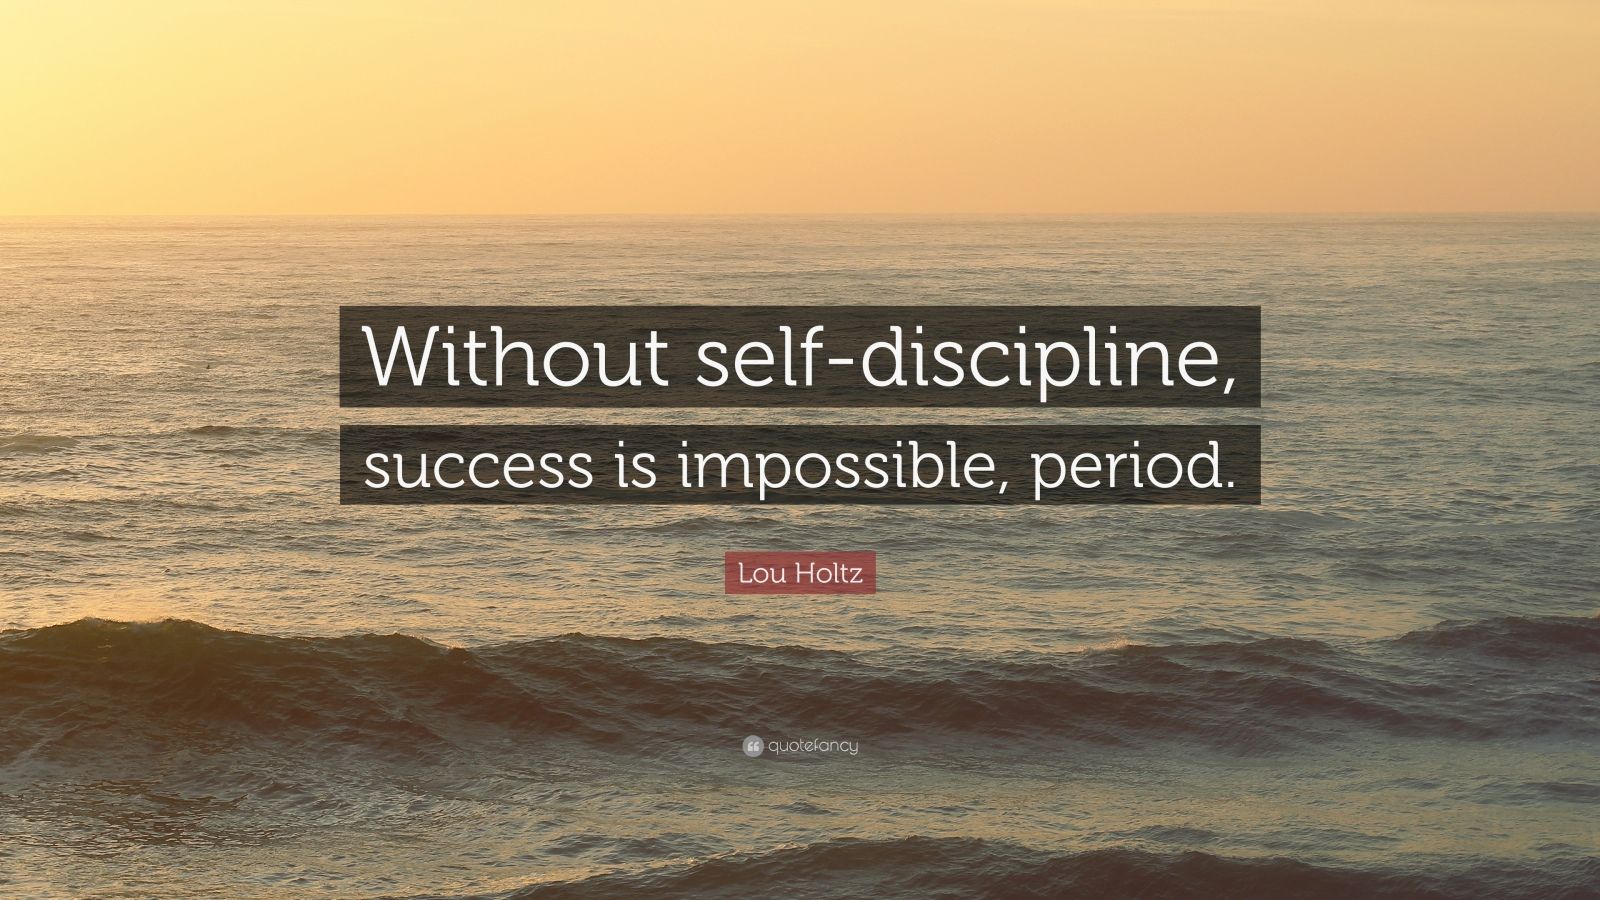 Lou Holtz Quote: “Without self-discipline, success is impossible